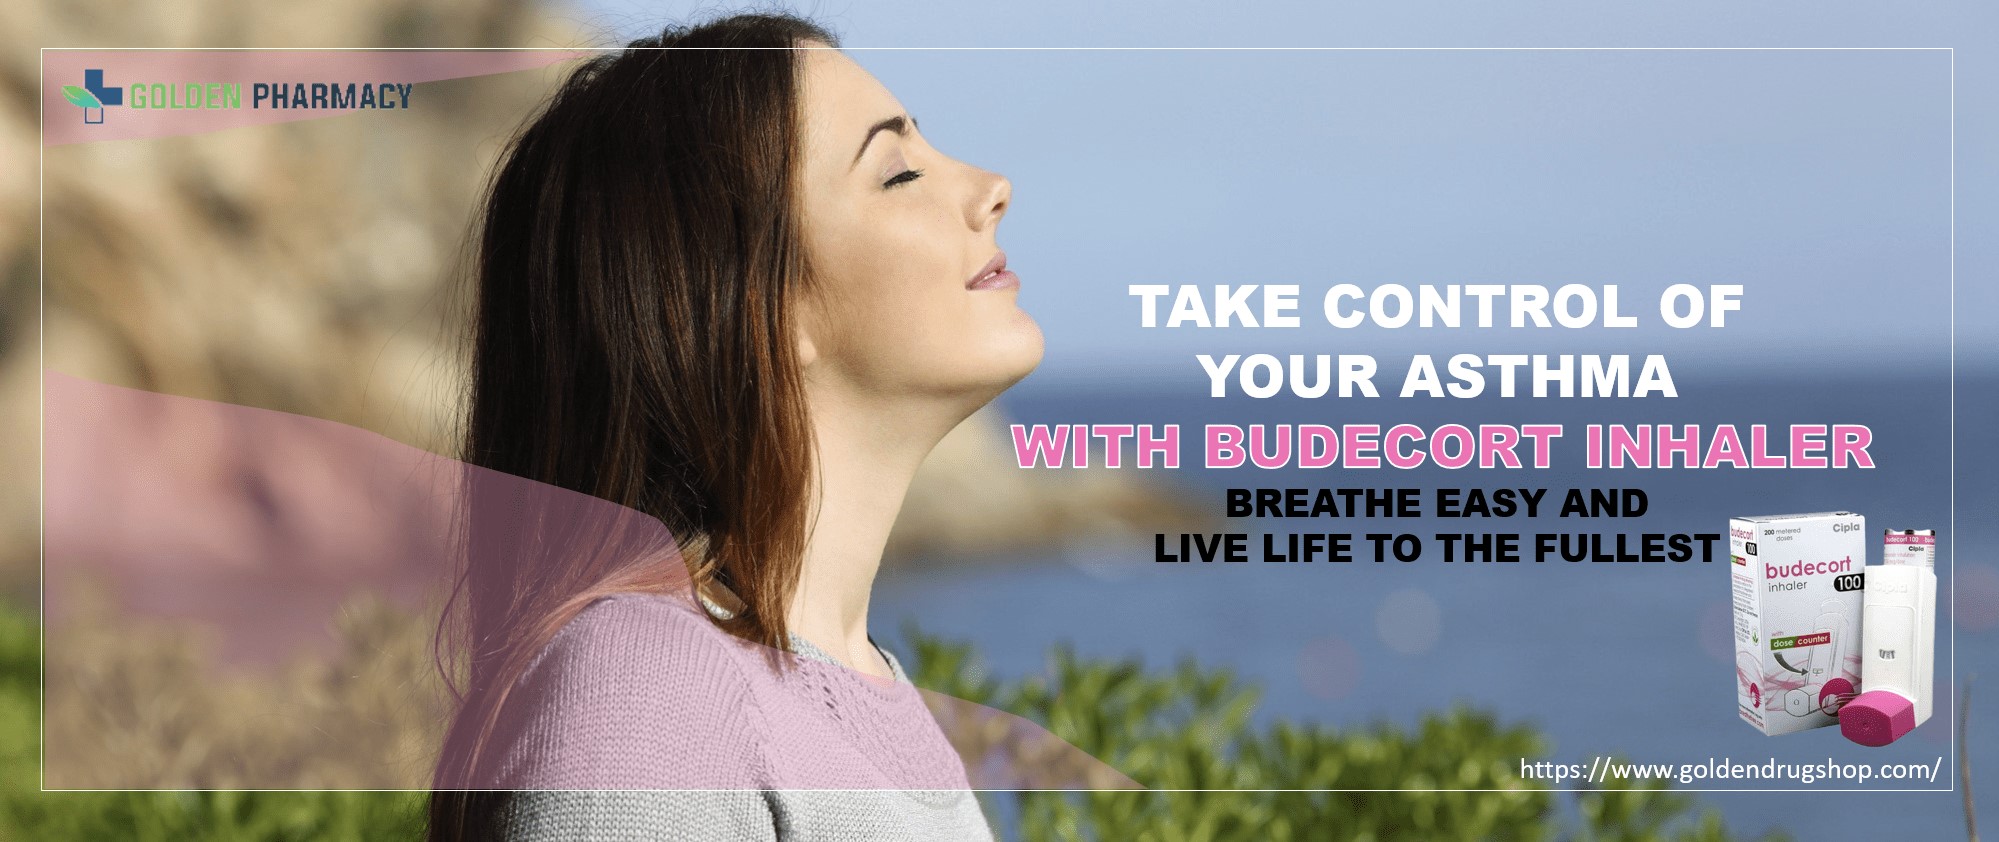 Take Control of Your Asthma with Budecort Inhaler: Breathe Easy and Live Life to the Fullest